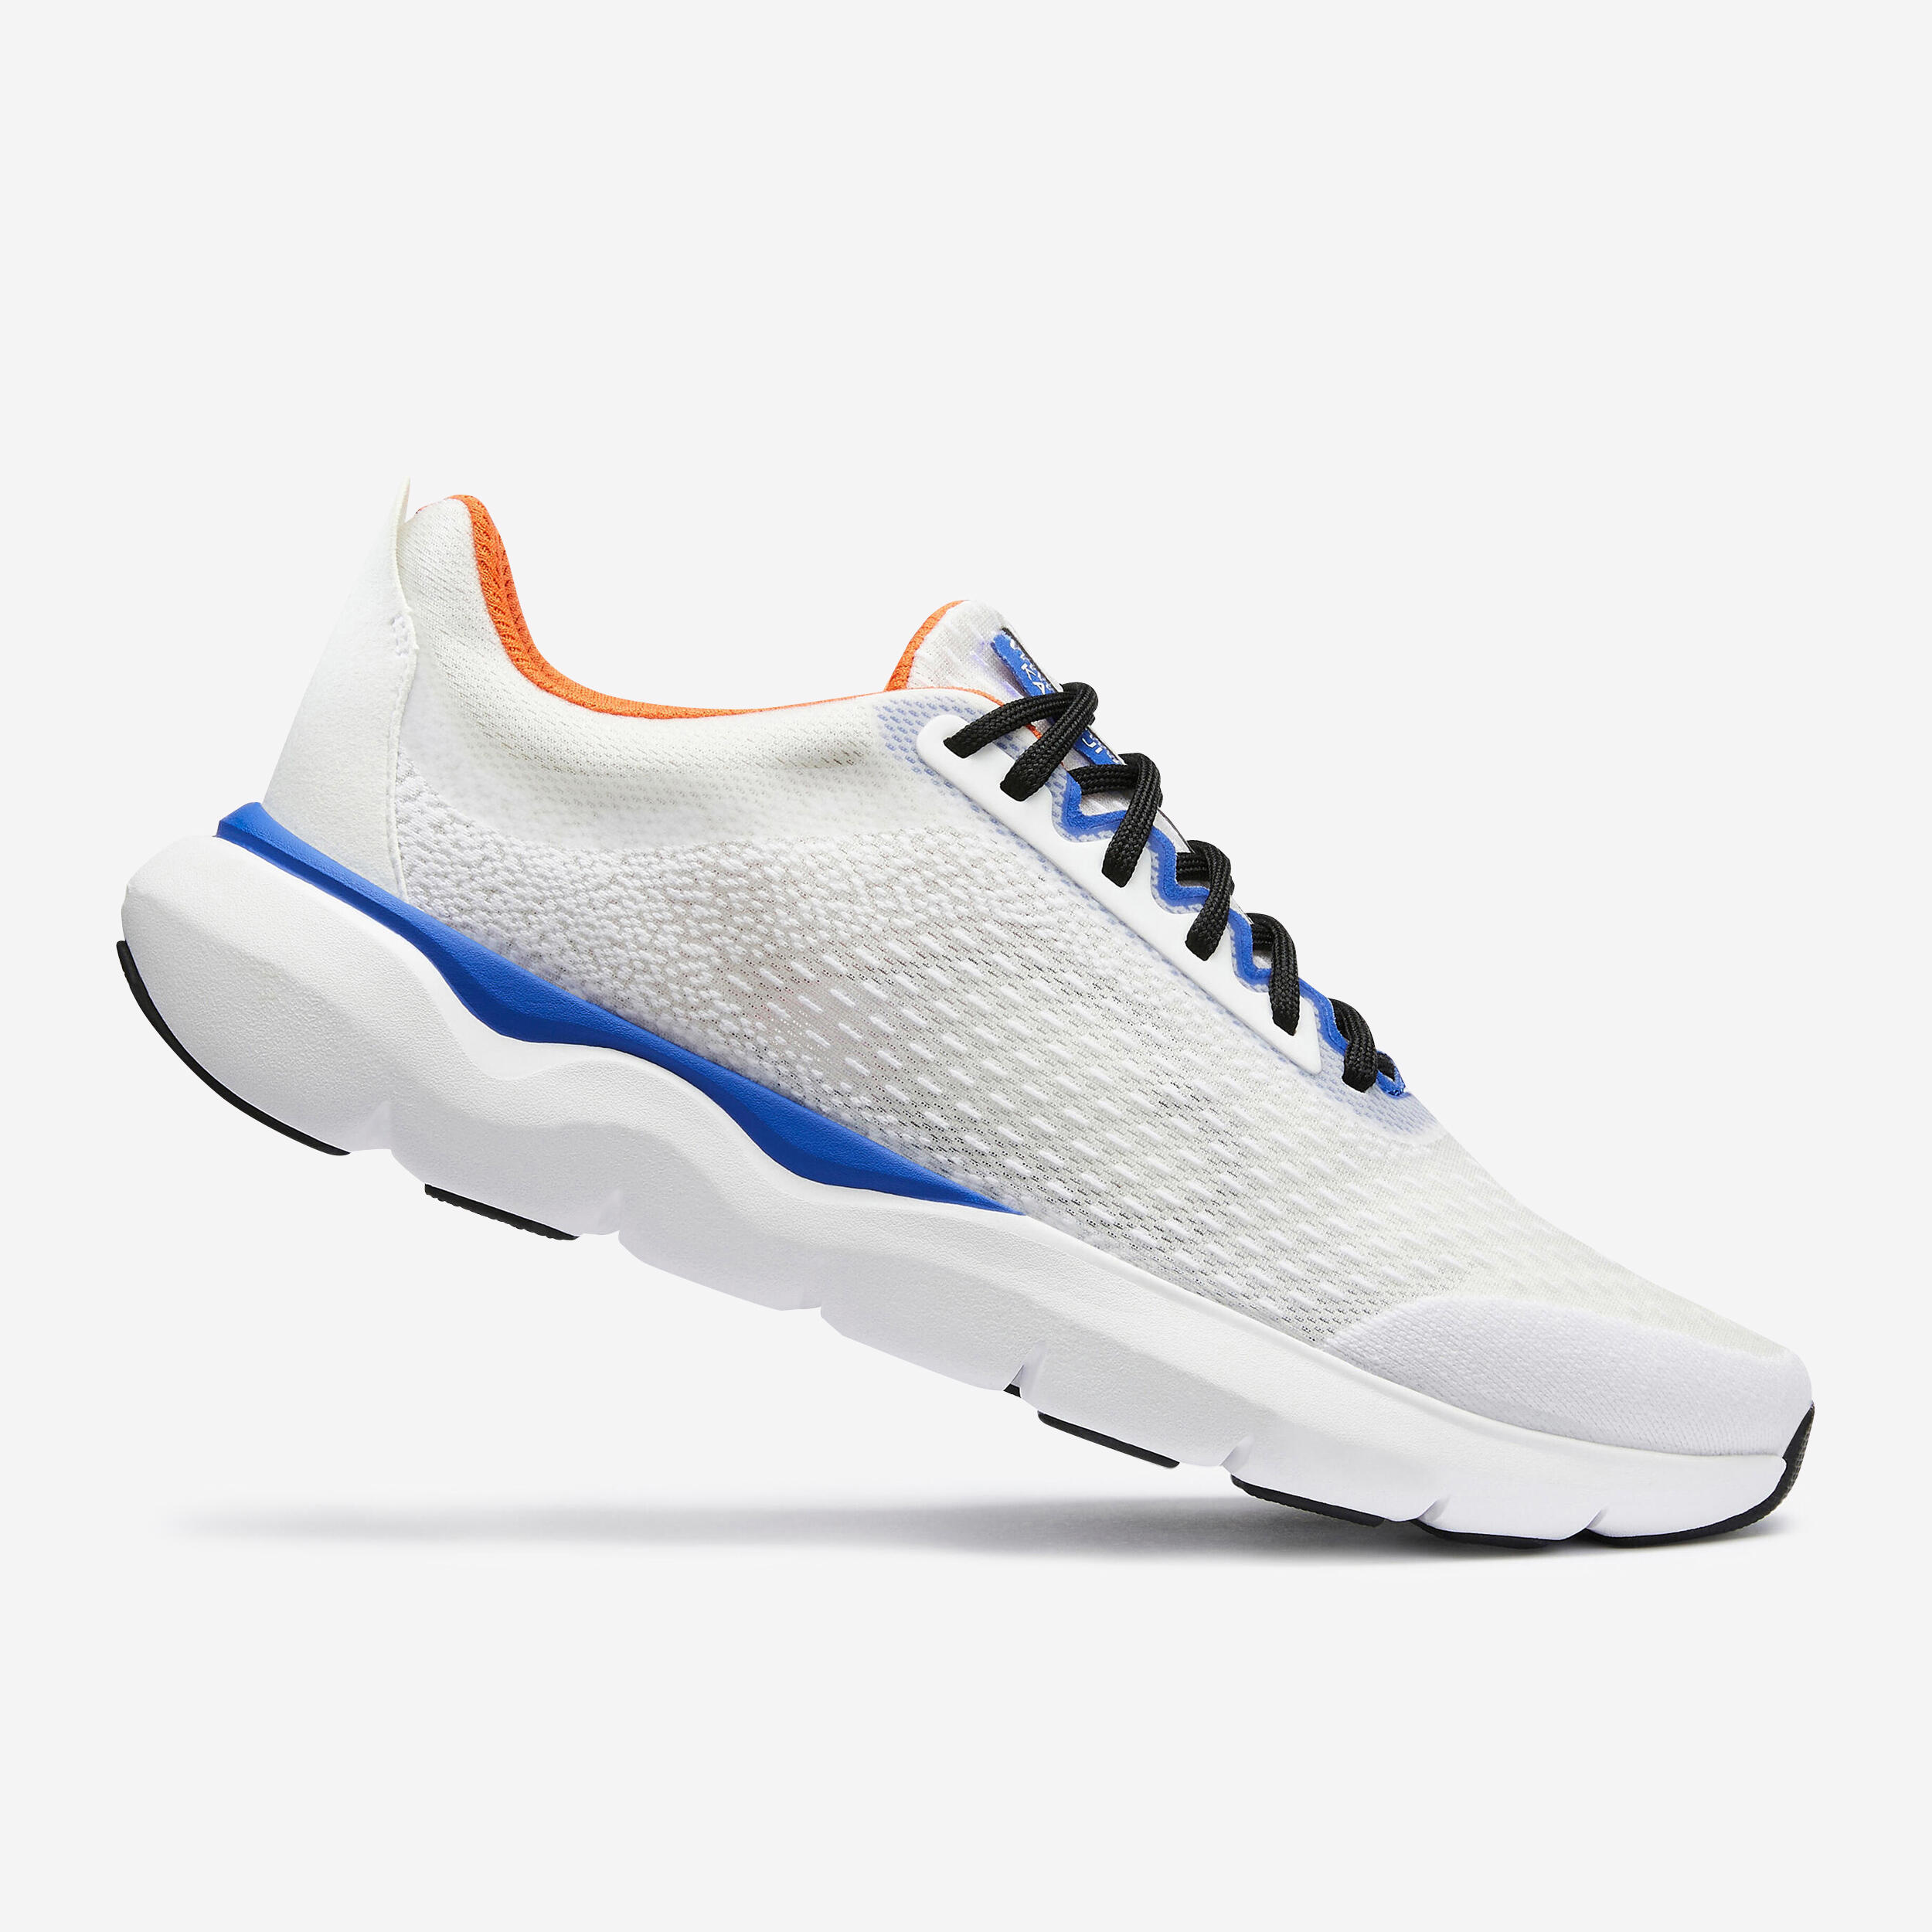 OG 2019 Y 3 QASA High Decathlon Kalenji Shoes For Men And Women Athletic  Training Sneakers For Walking, Gym, And Jogging From Licheng_shoes, $103.55